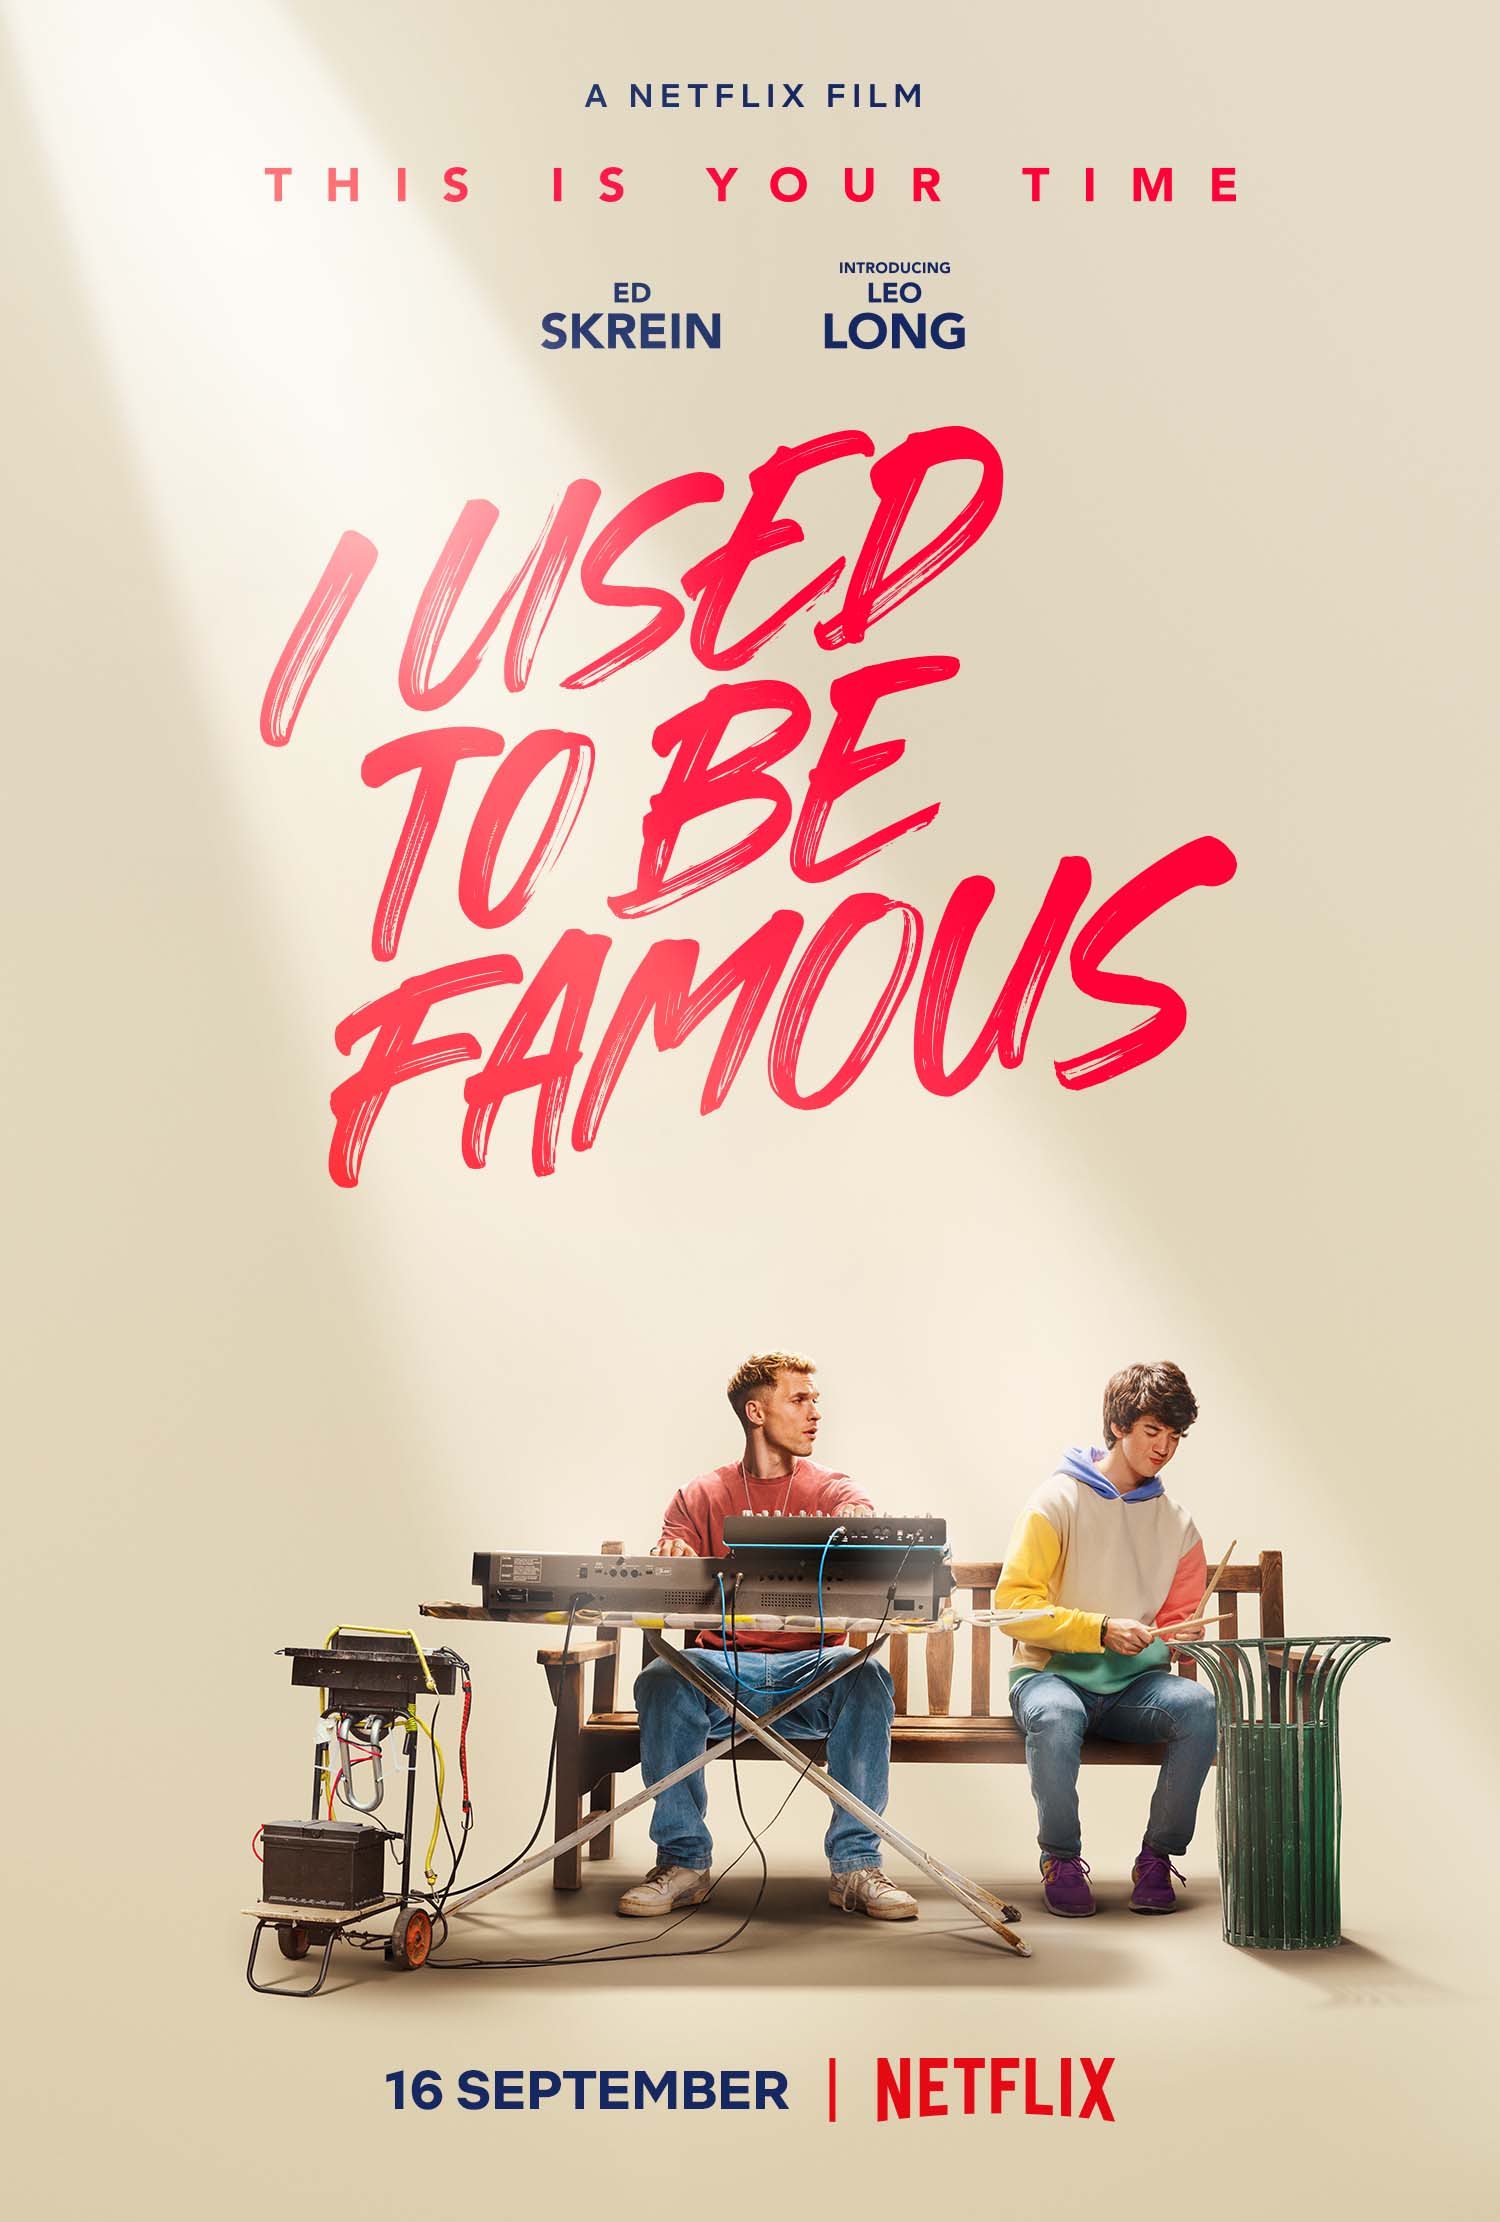 Is I Used to Be Famous (2022) on Netflix